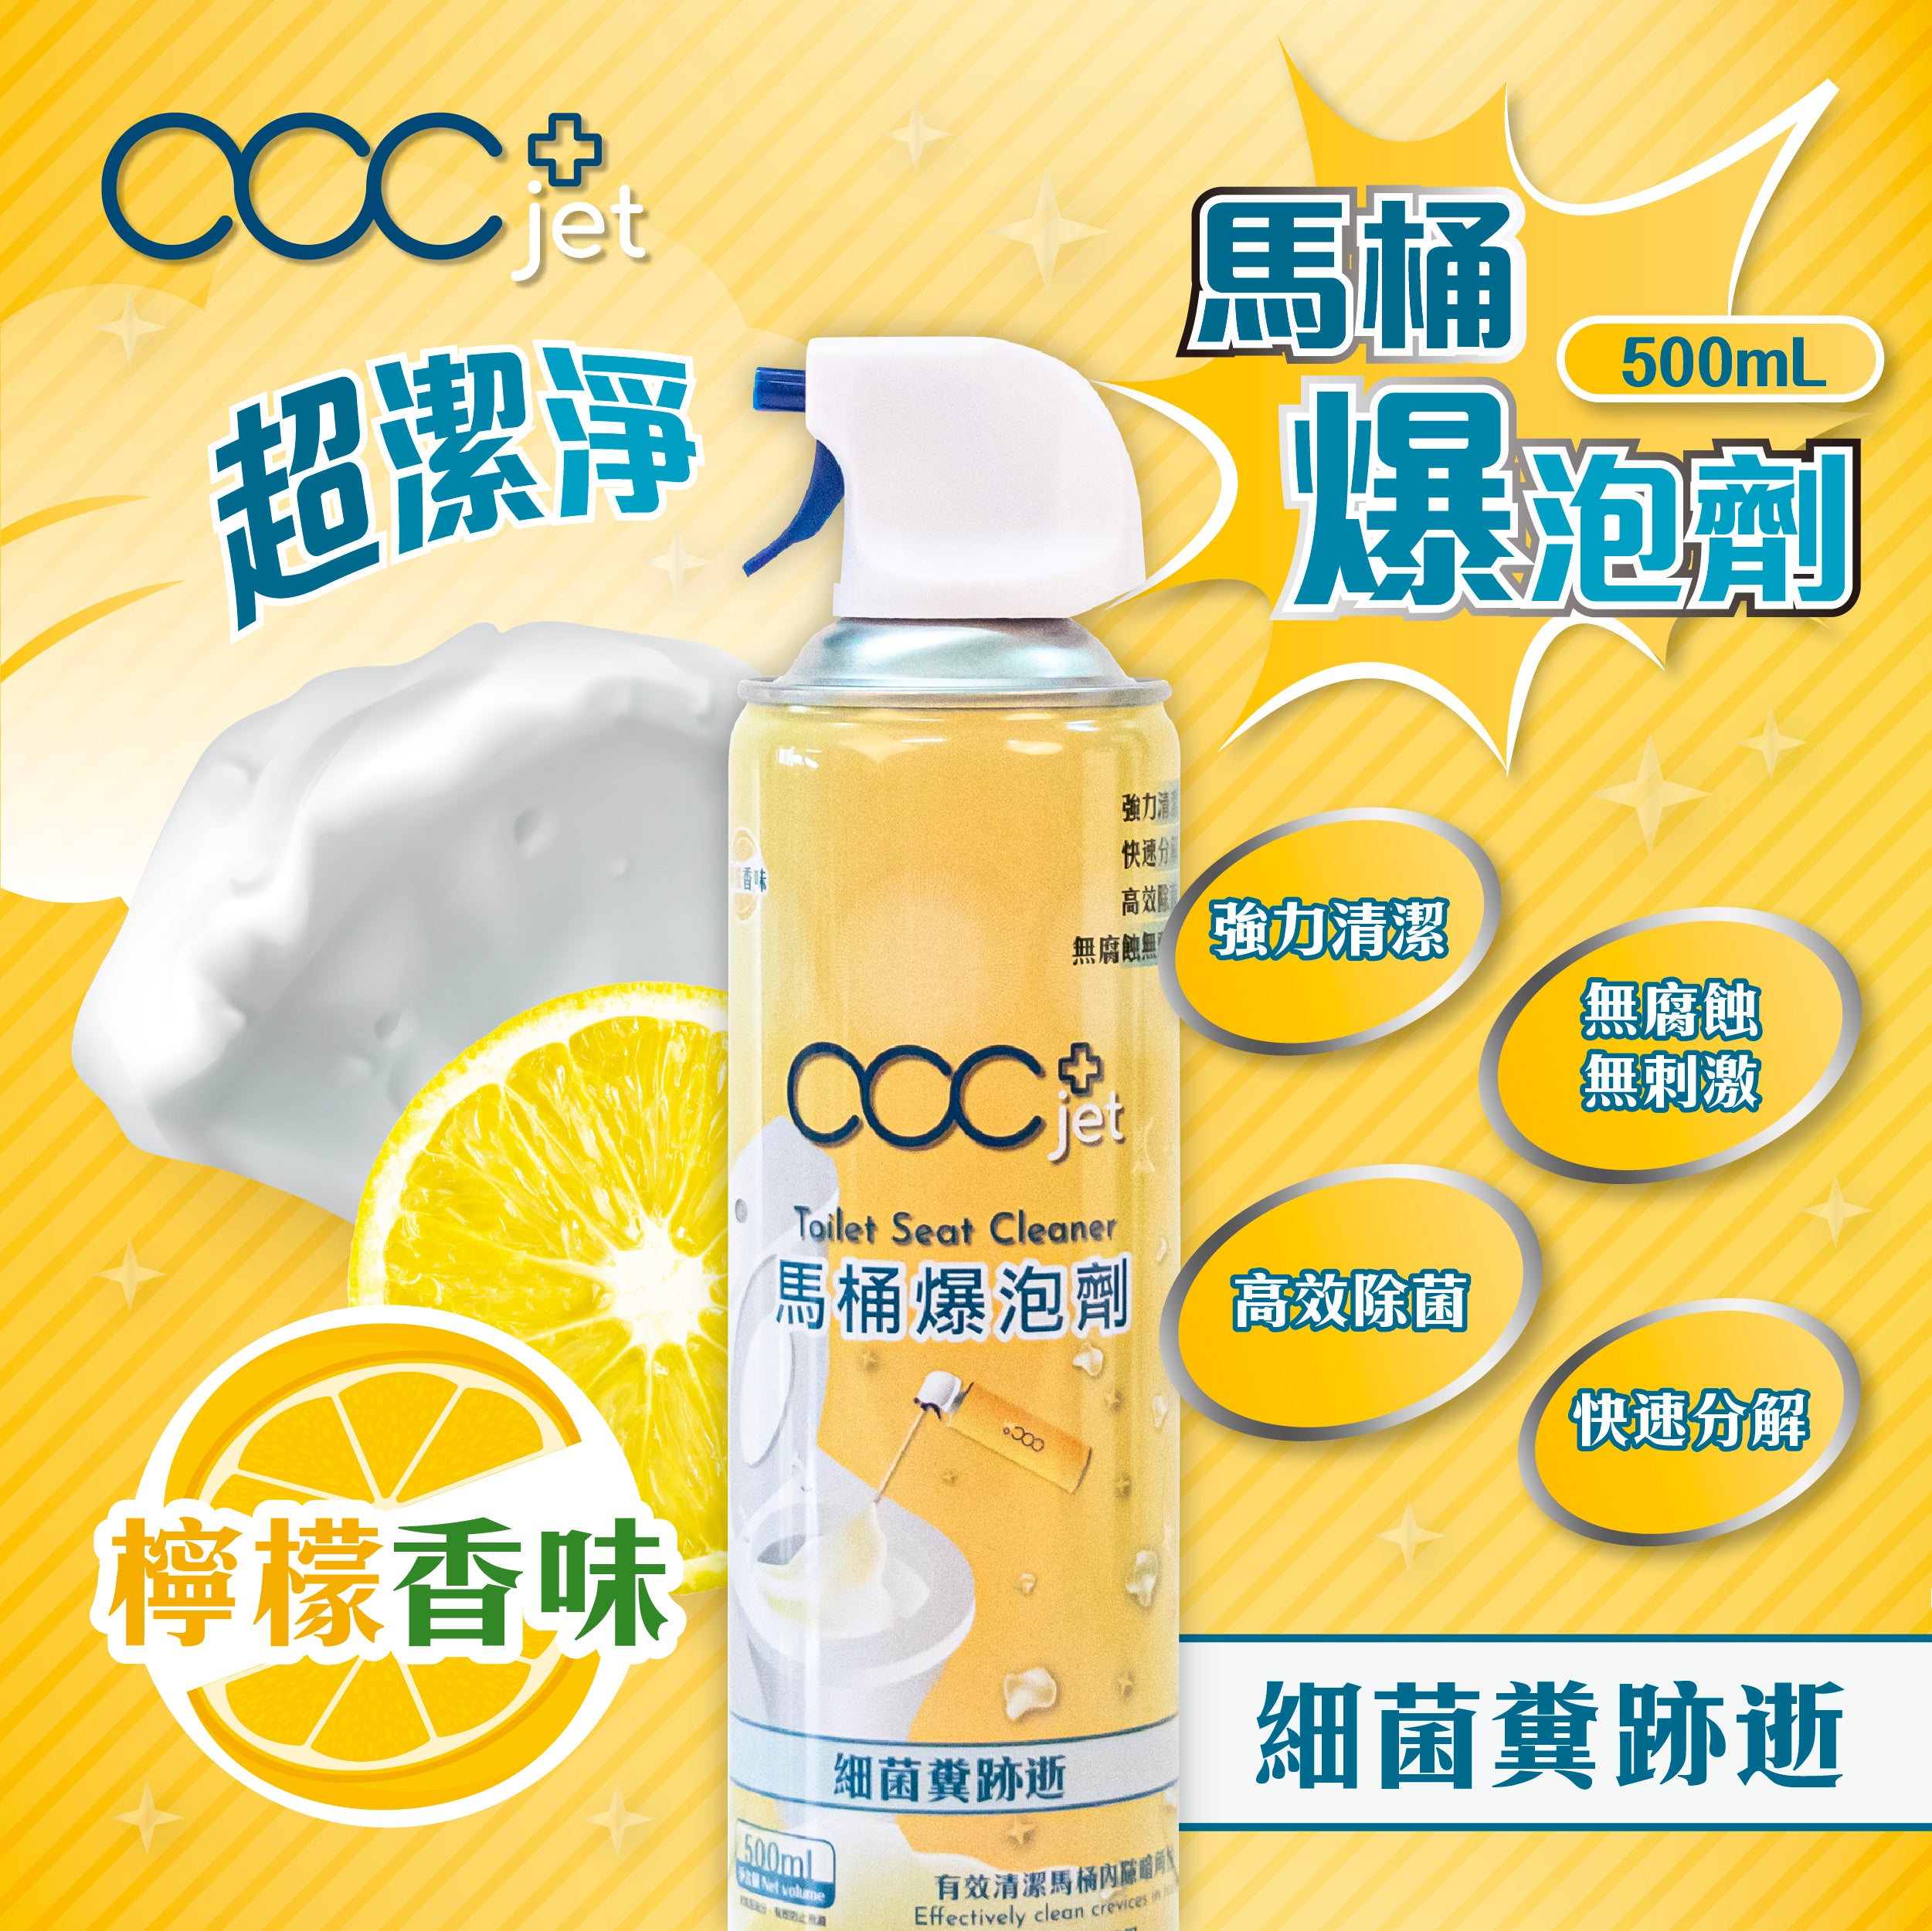 acc+ jet toilet blasting agent is available in Japantown/Abutai/HKTVmall, which effectively cleans the bacteria and feces 